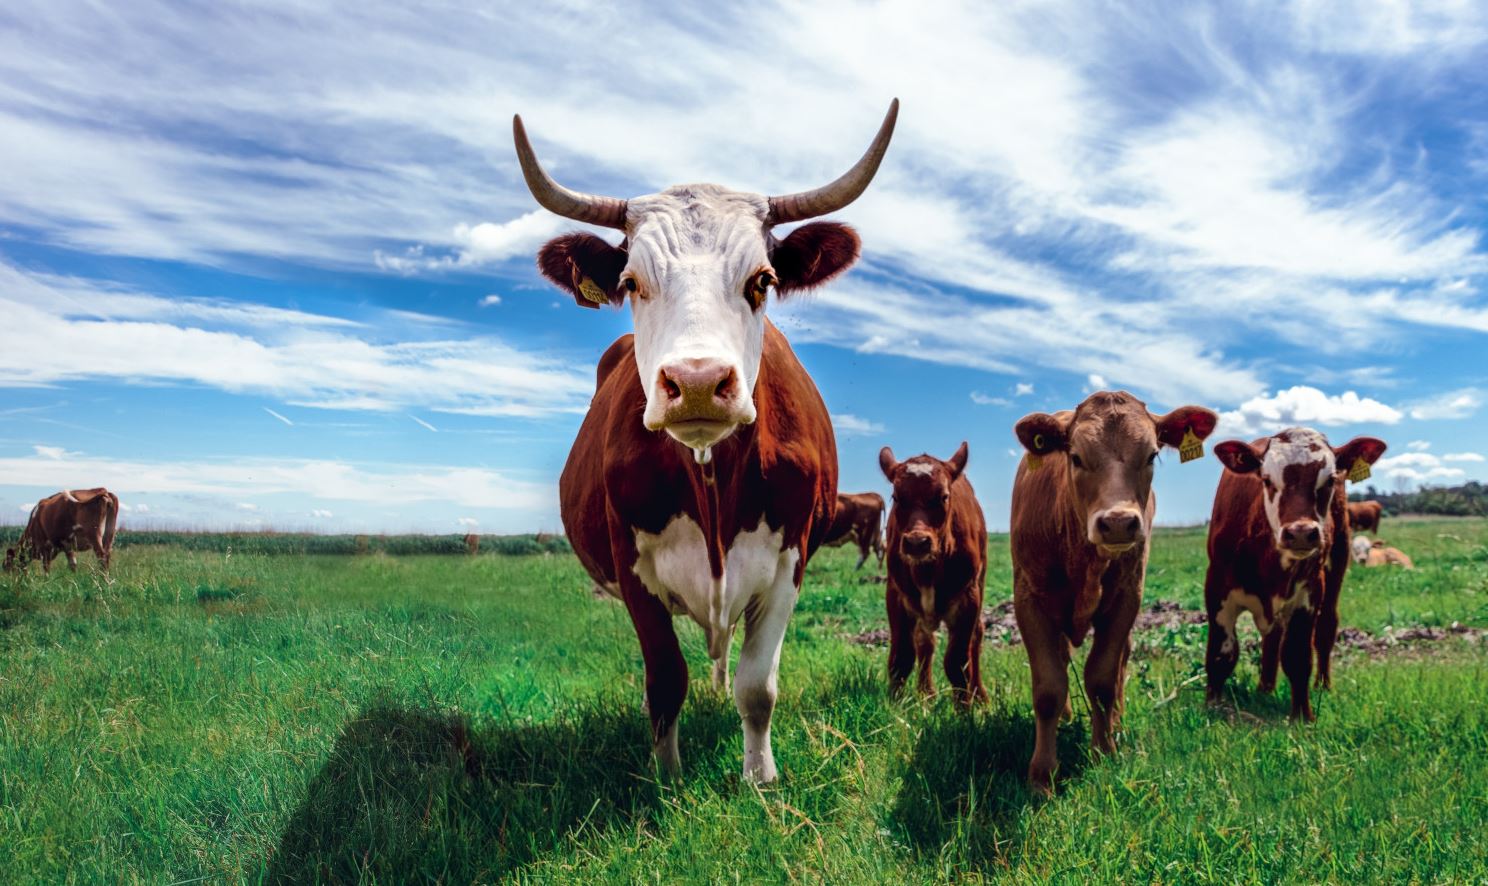 Brazil's Mato Grosso state ranks first in the number of cattle, but only 16th in population.